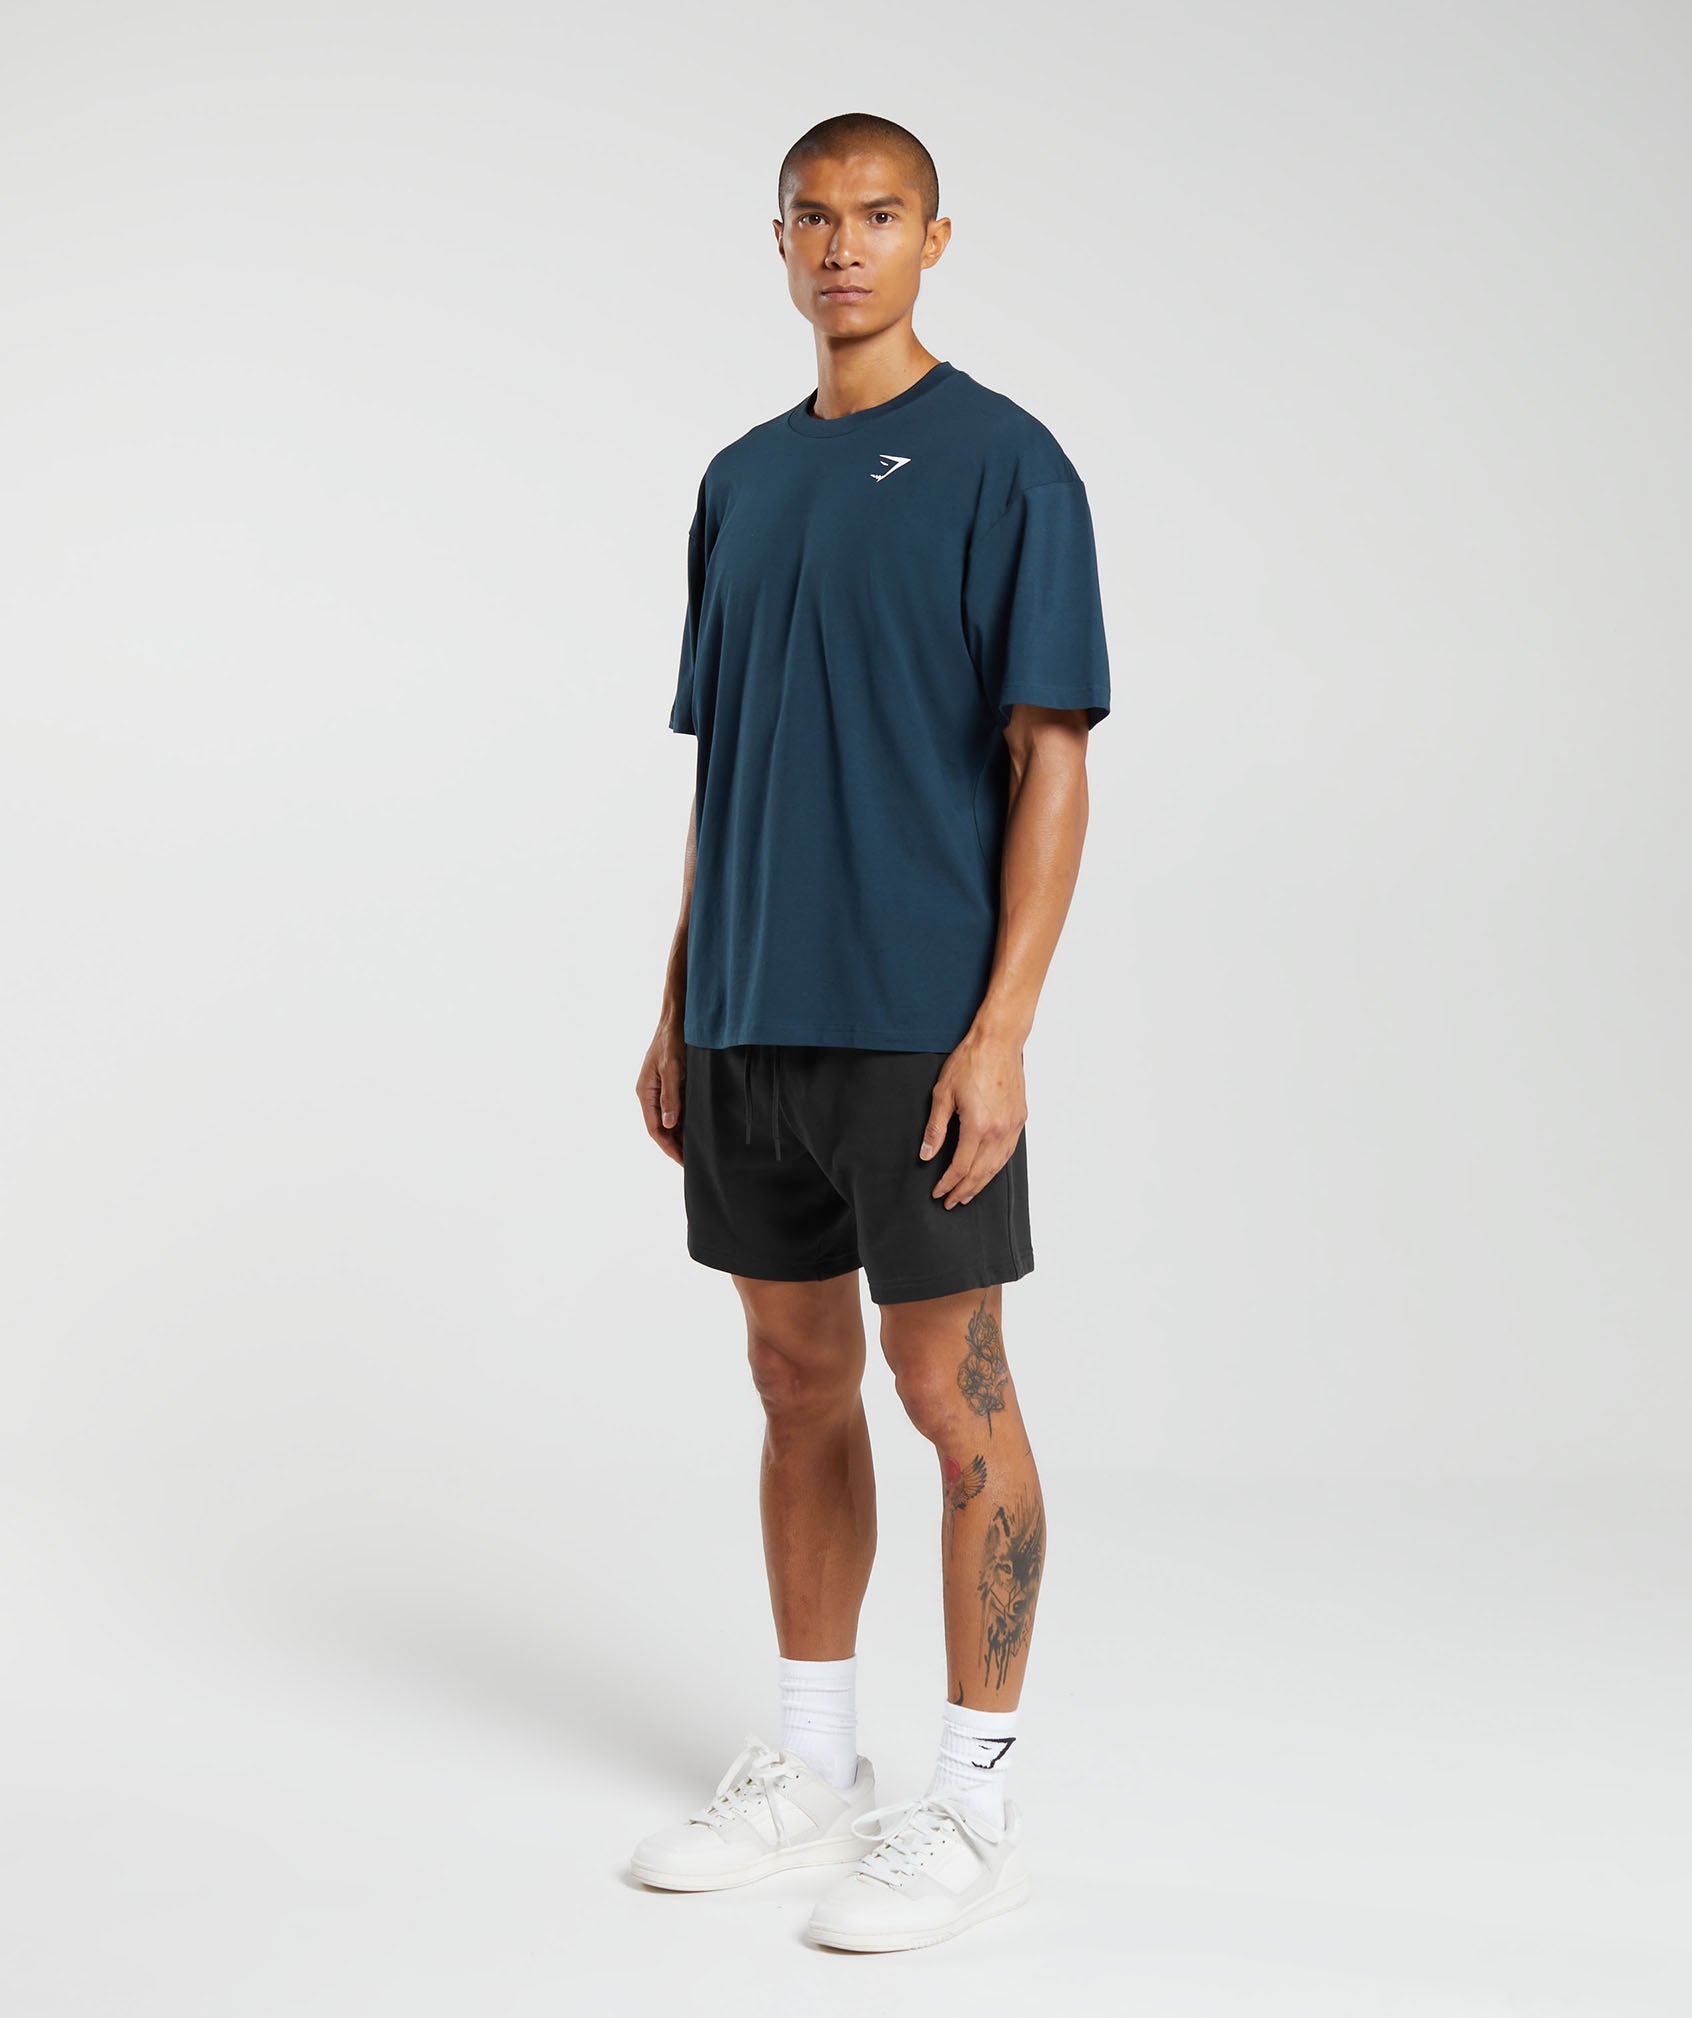 Essential Oversized T-Shirt in Navy - view 4